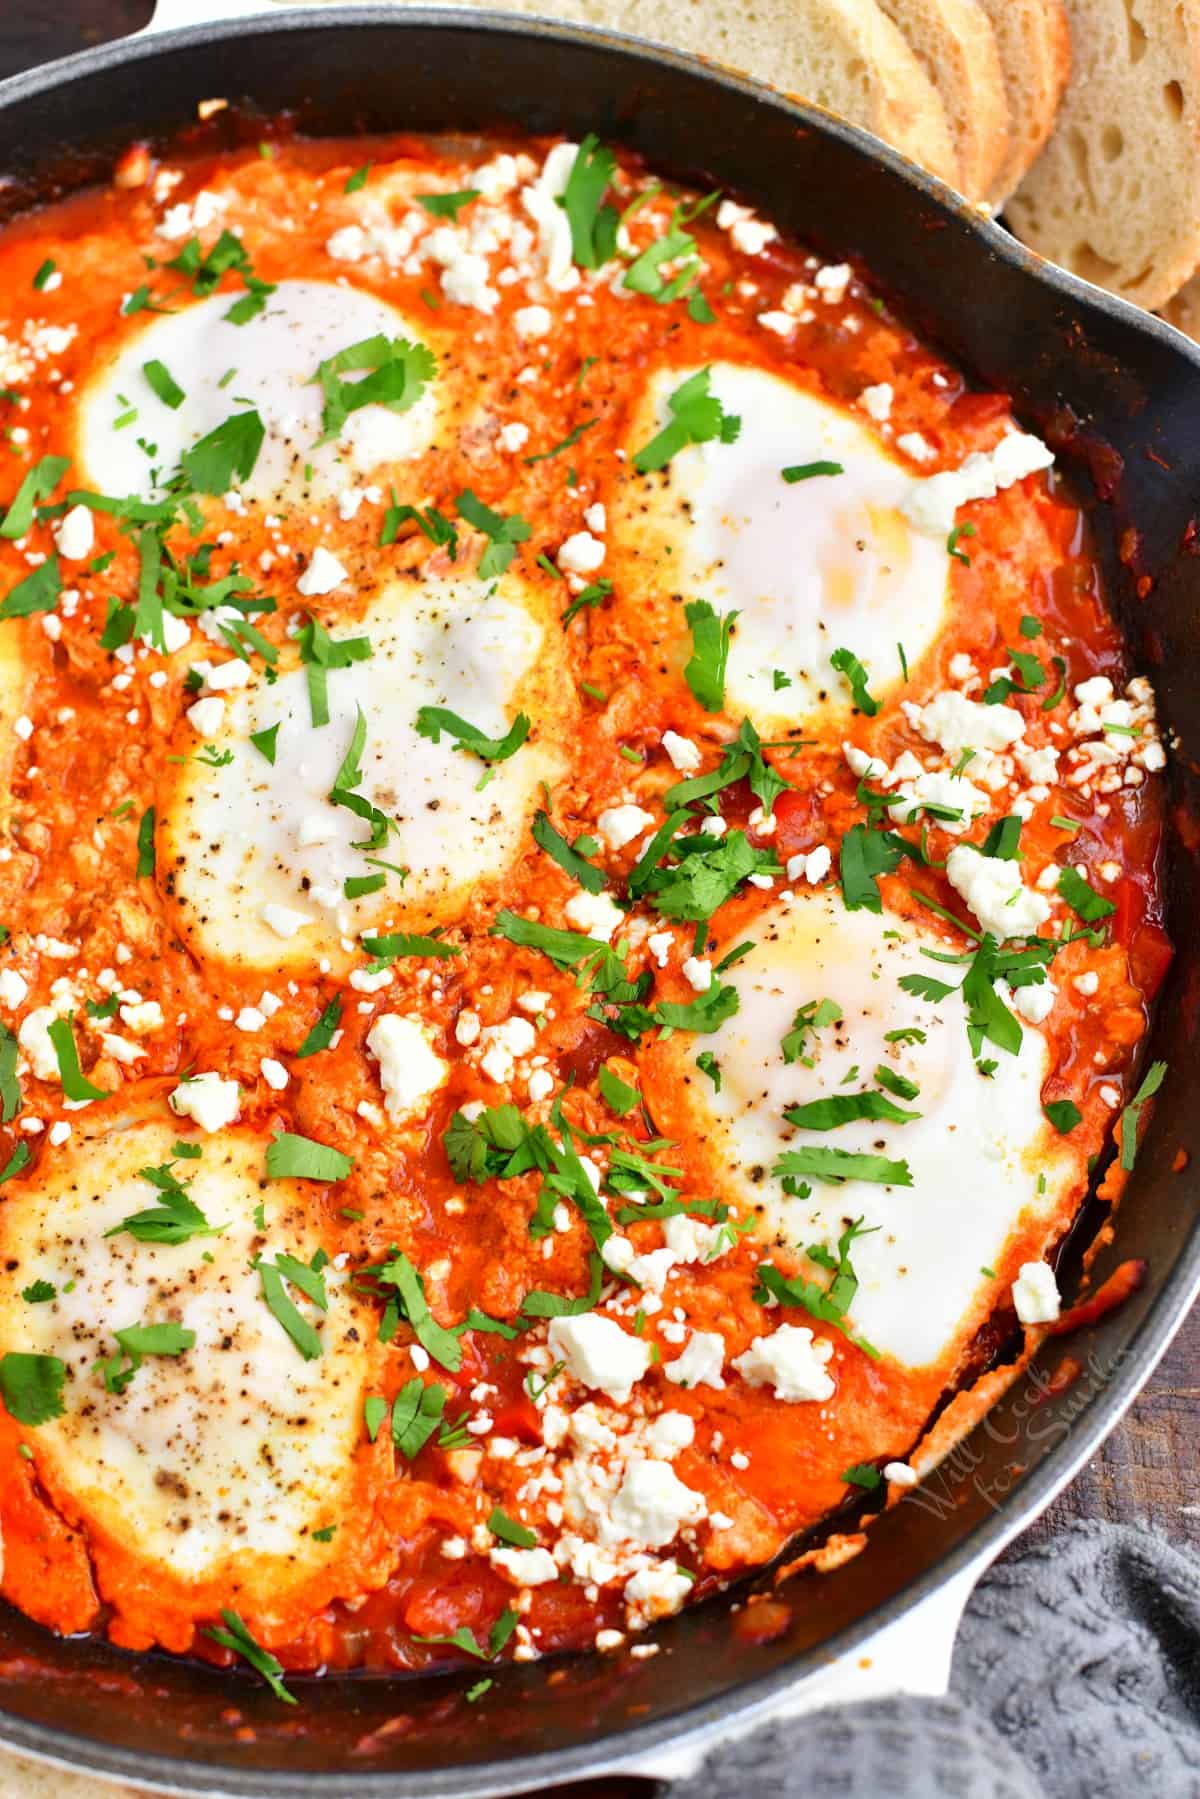 Shakshuka is garnished and ready to eat.